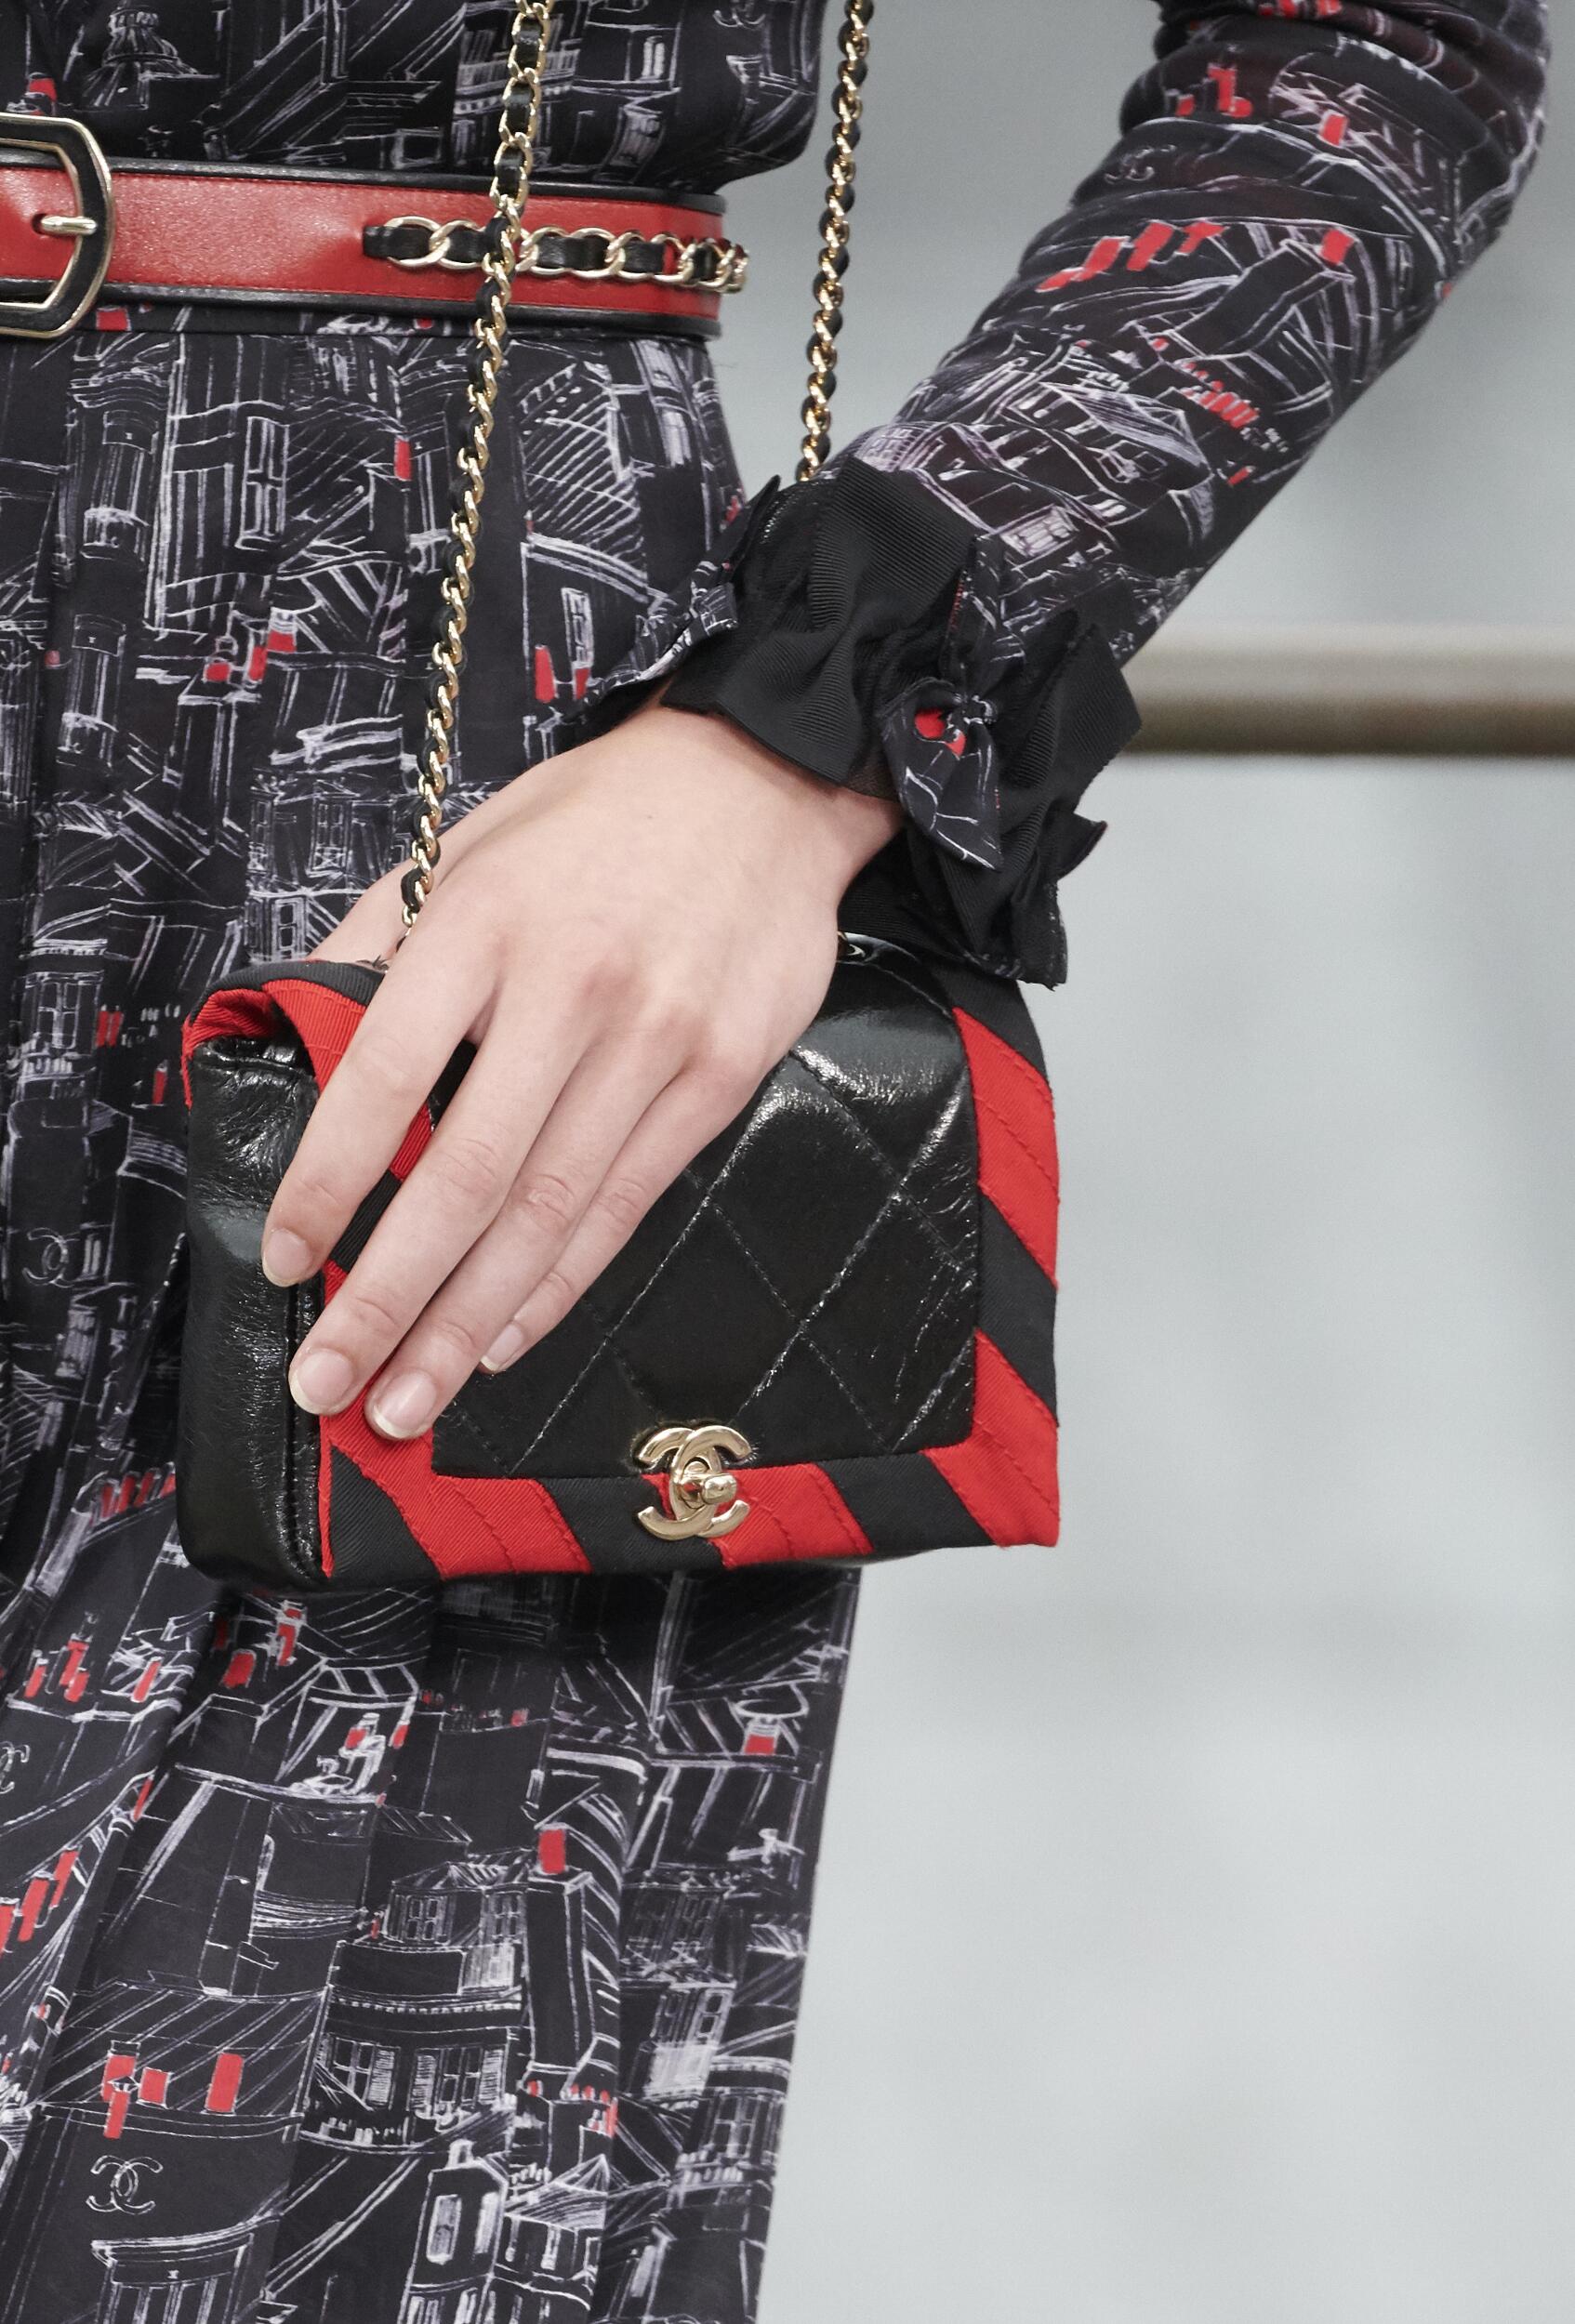 CHANEL SPRING SUMMER 2020 WOMEN’S COLLECTION DETAILS | The Skinny Beep